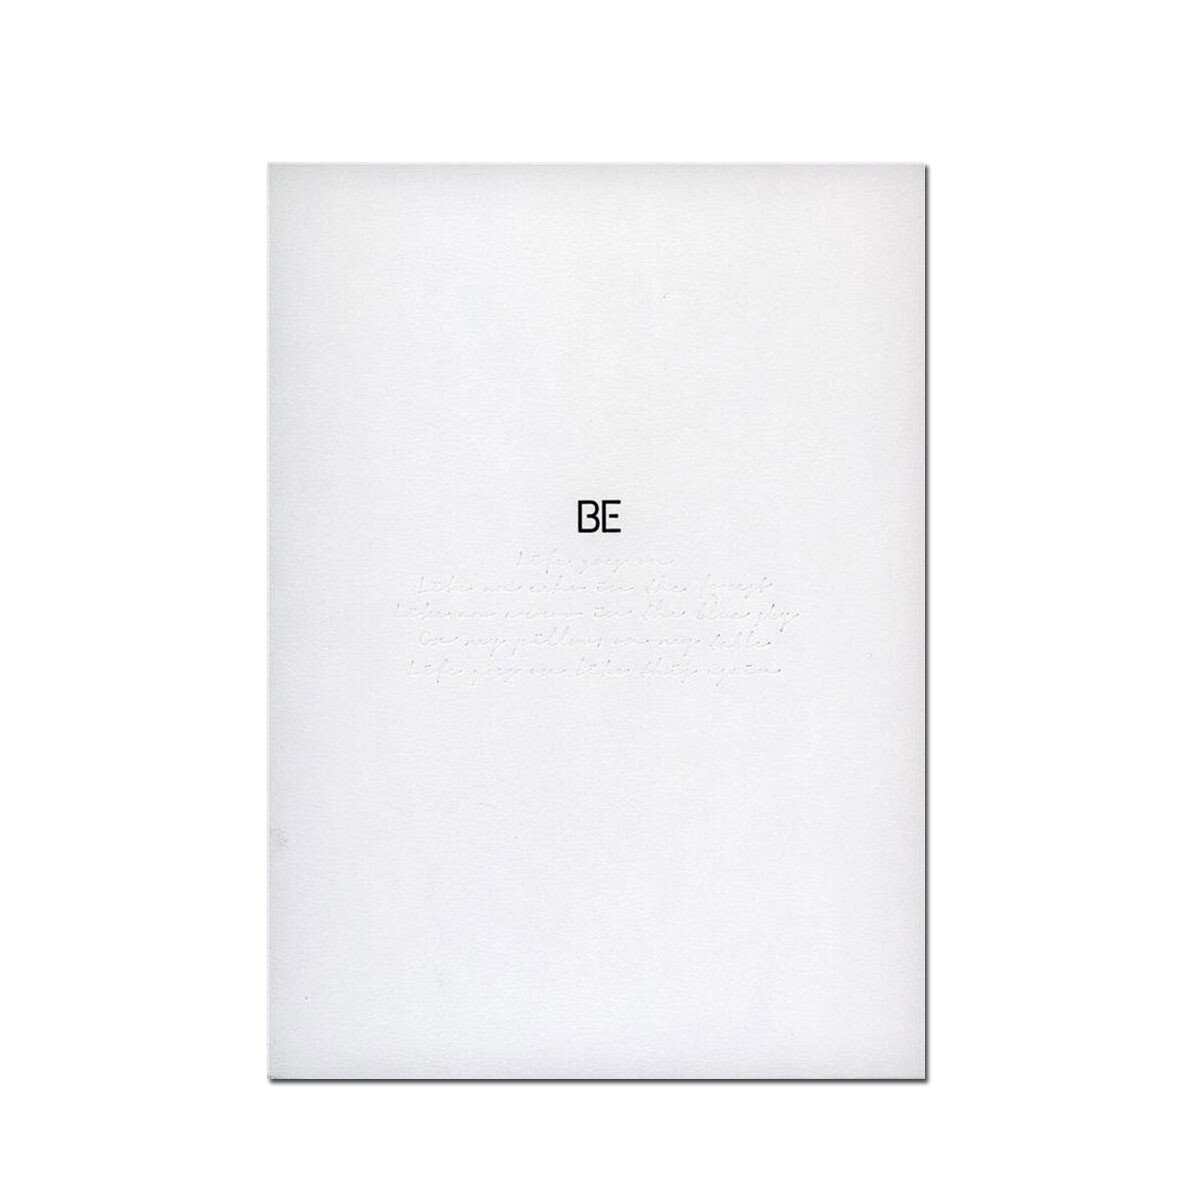 Bts-be Deluxe Edition Cd Box Set 